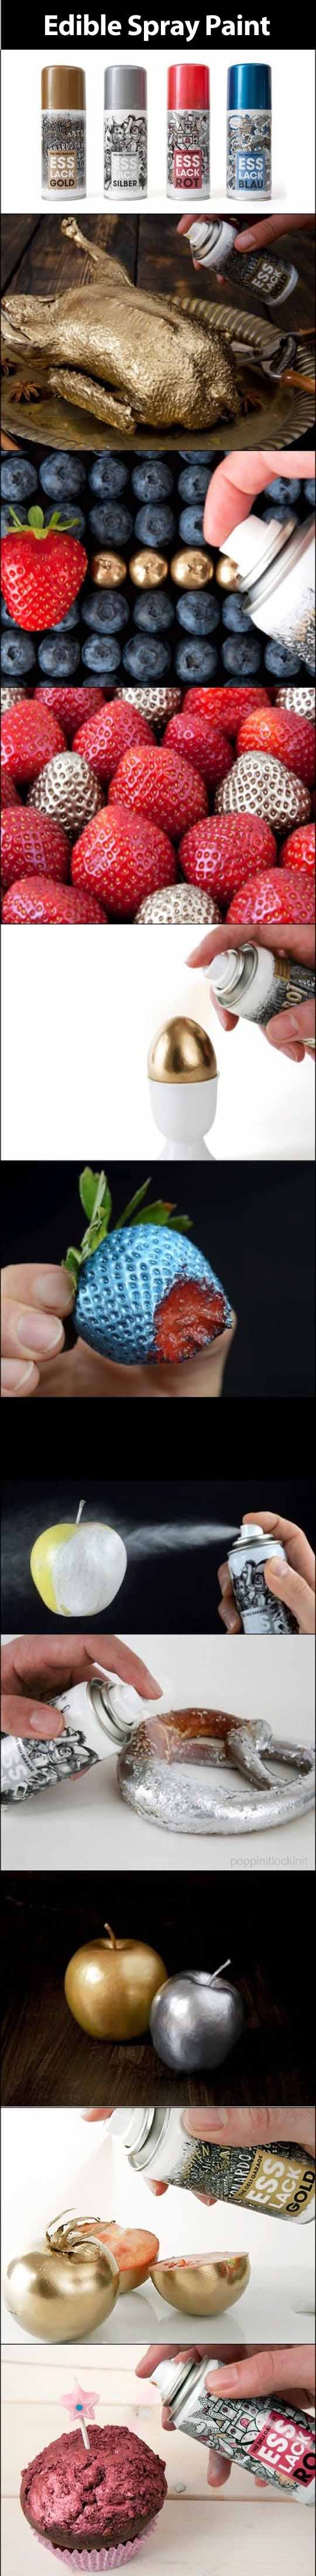 Spray Paint That You Can Eat